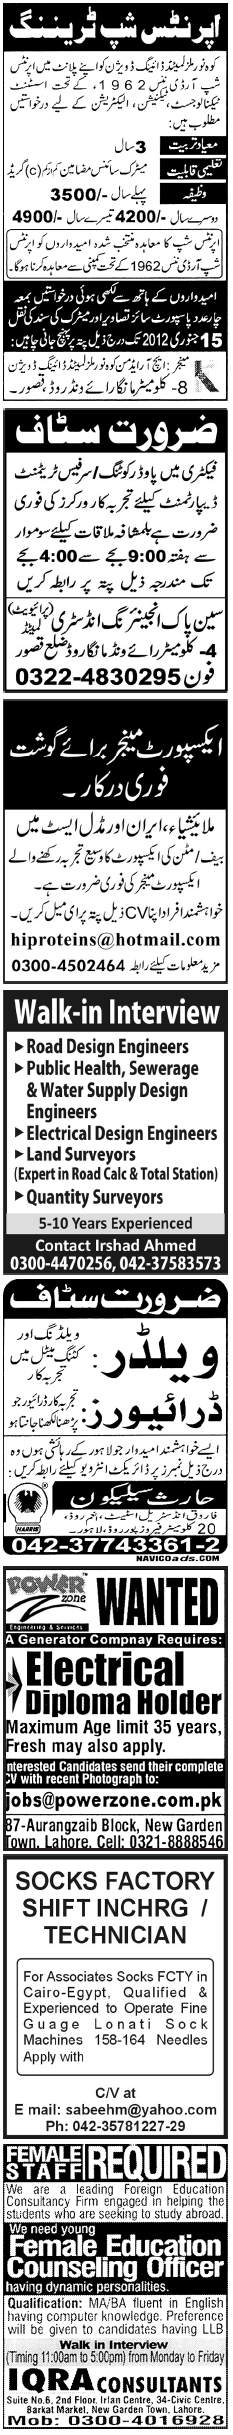 Misc. Jobs in Lahore Jang Classified 4